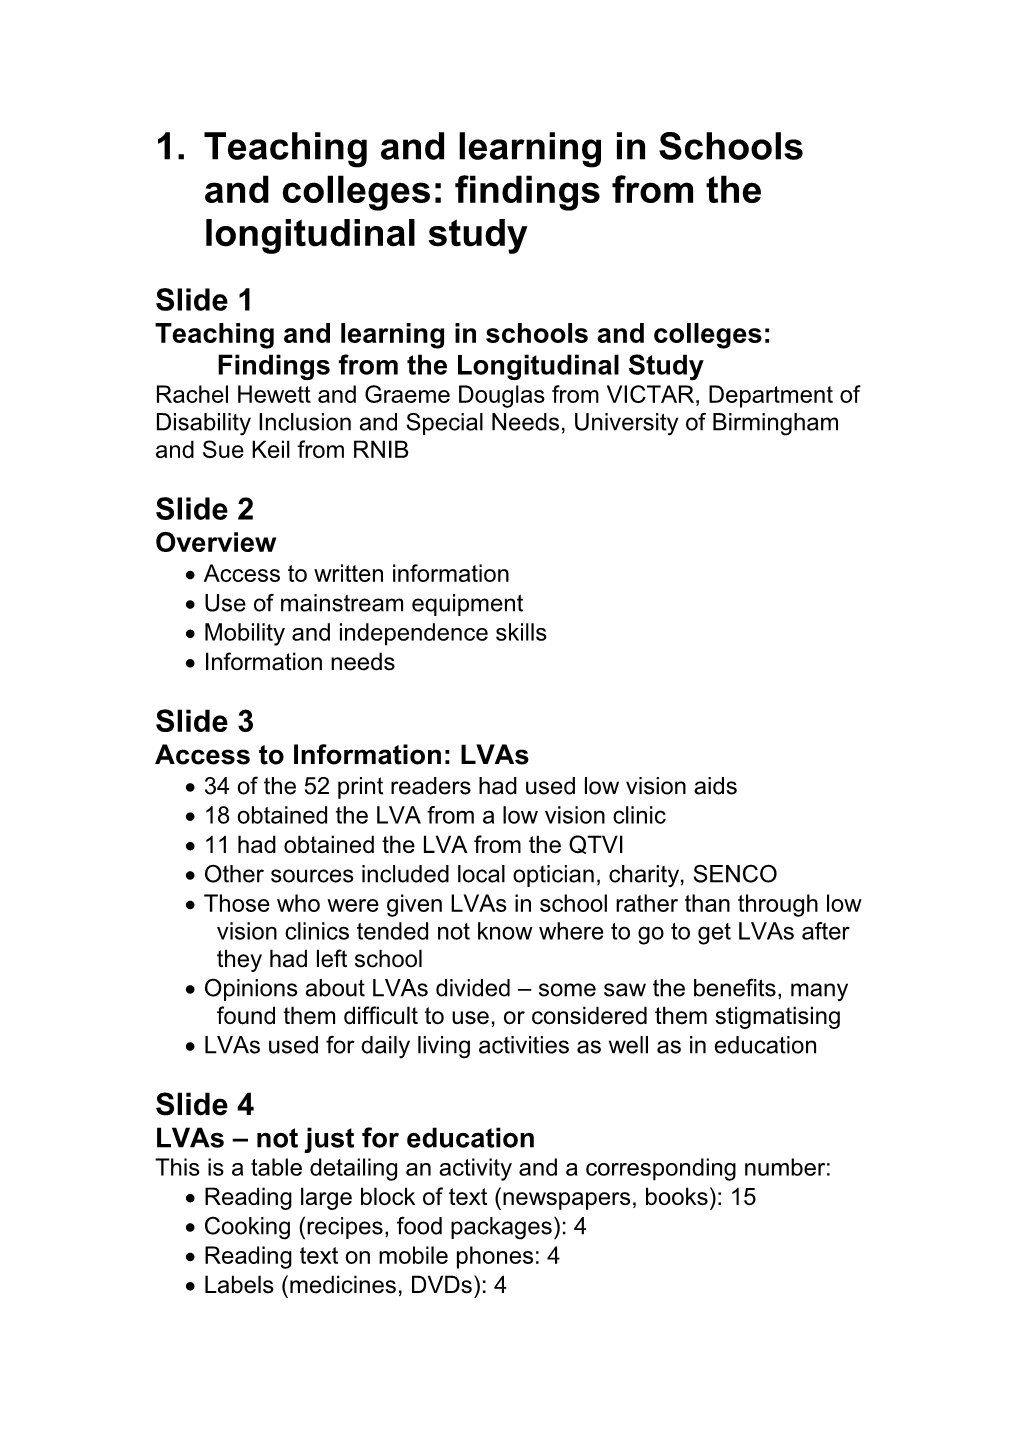 Teaching and Learning in Schools and Colleges: Findings from the Longitudinal Study